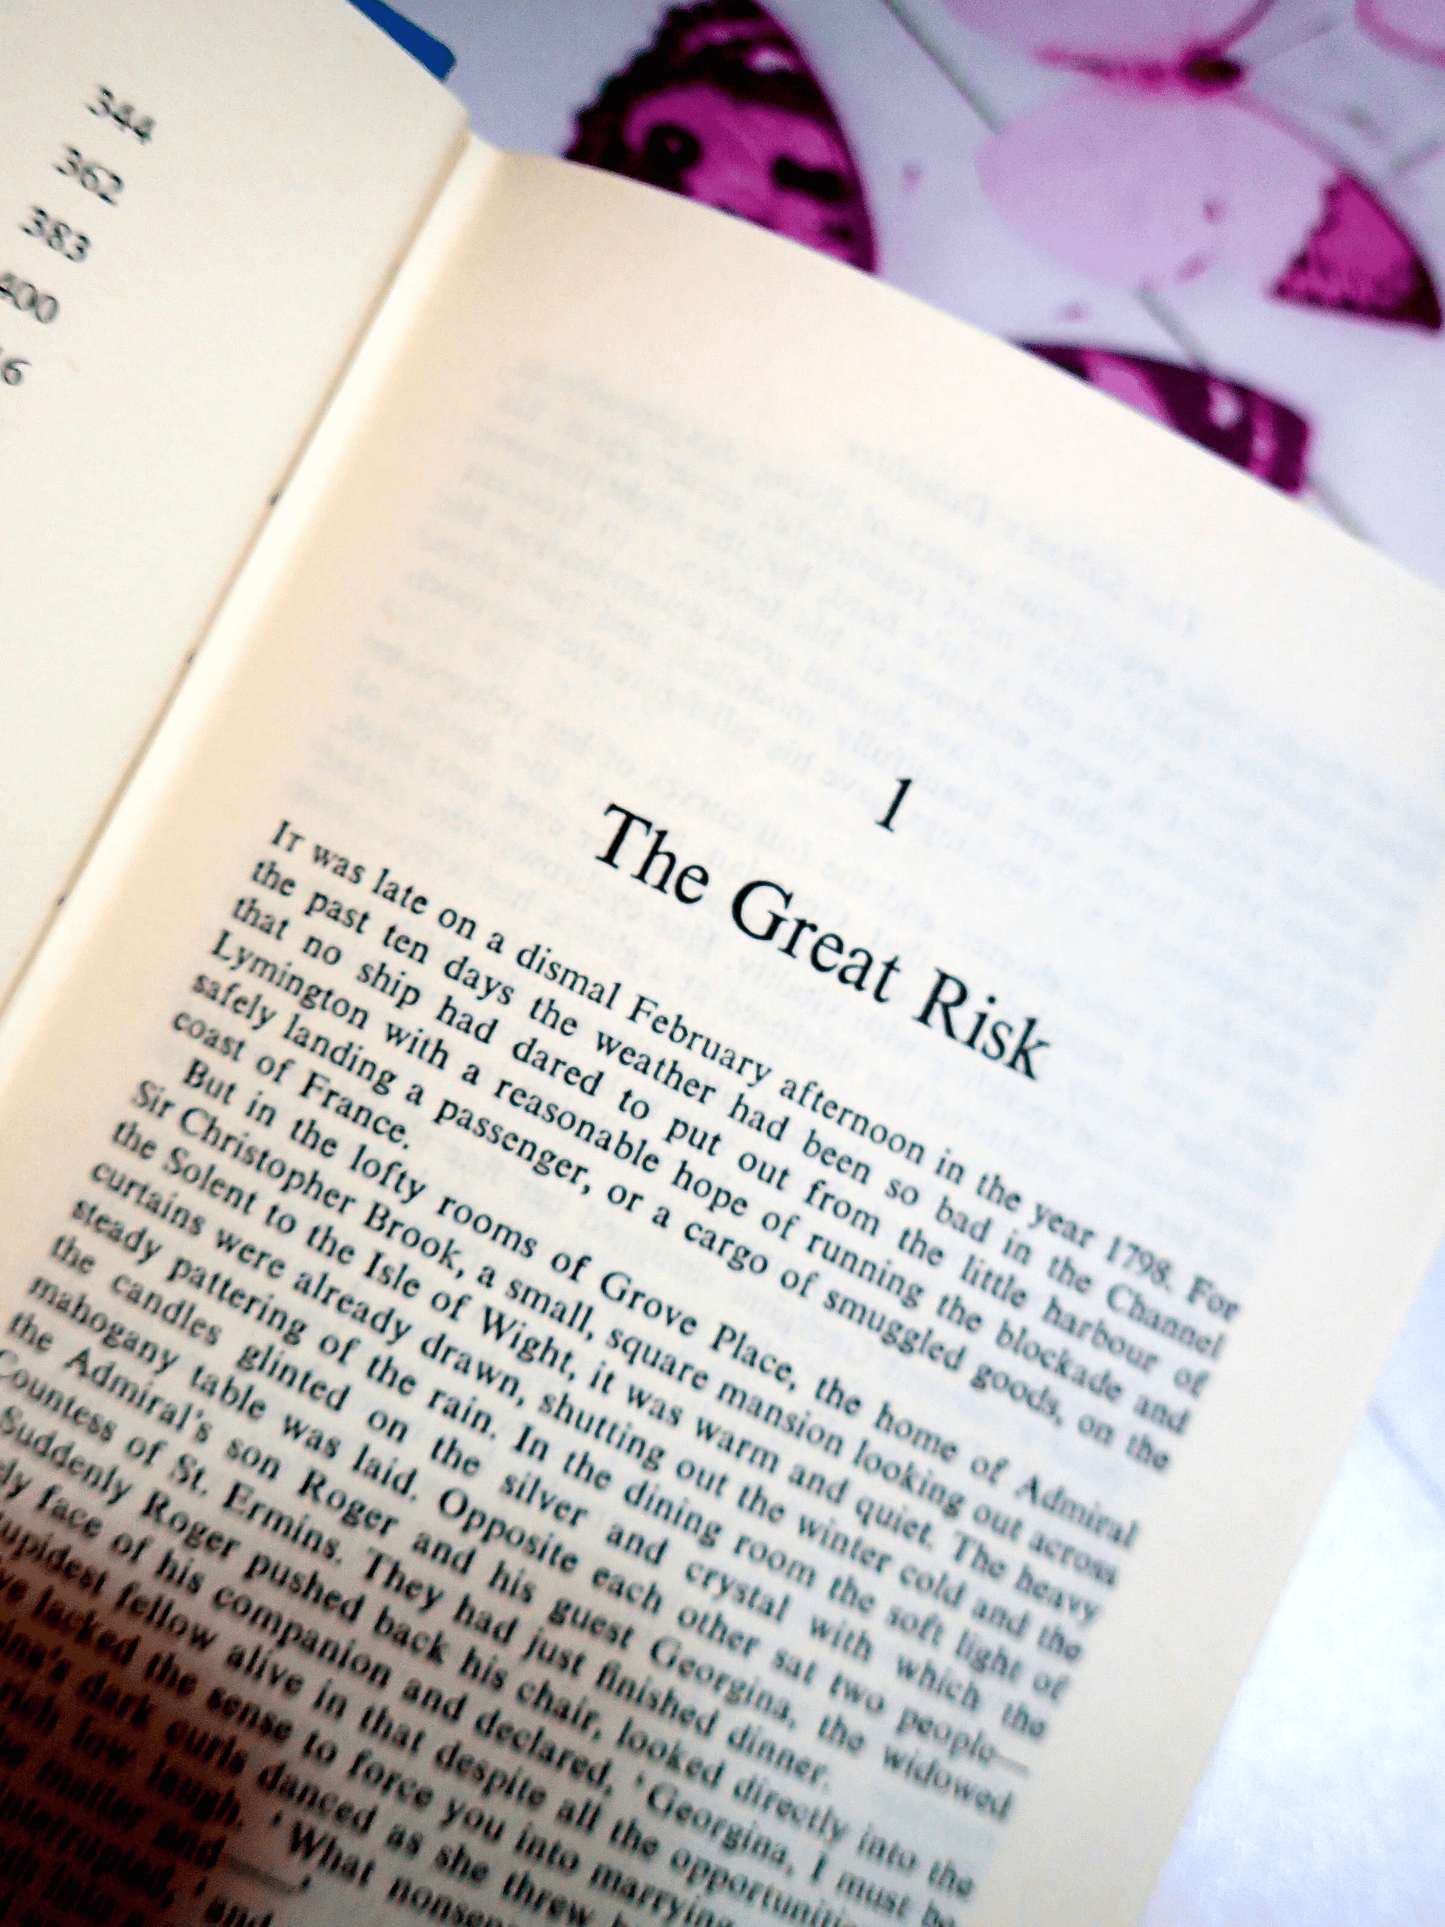 First page of The Sultans Daughter Dennis Wheatley Vintage Book BCA: Chapter 1. The Great Risk.